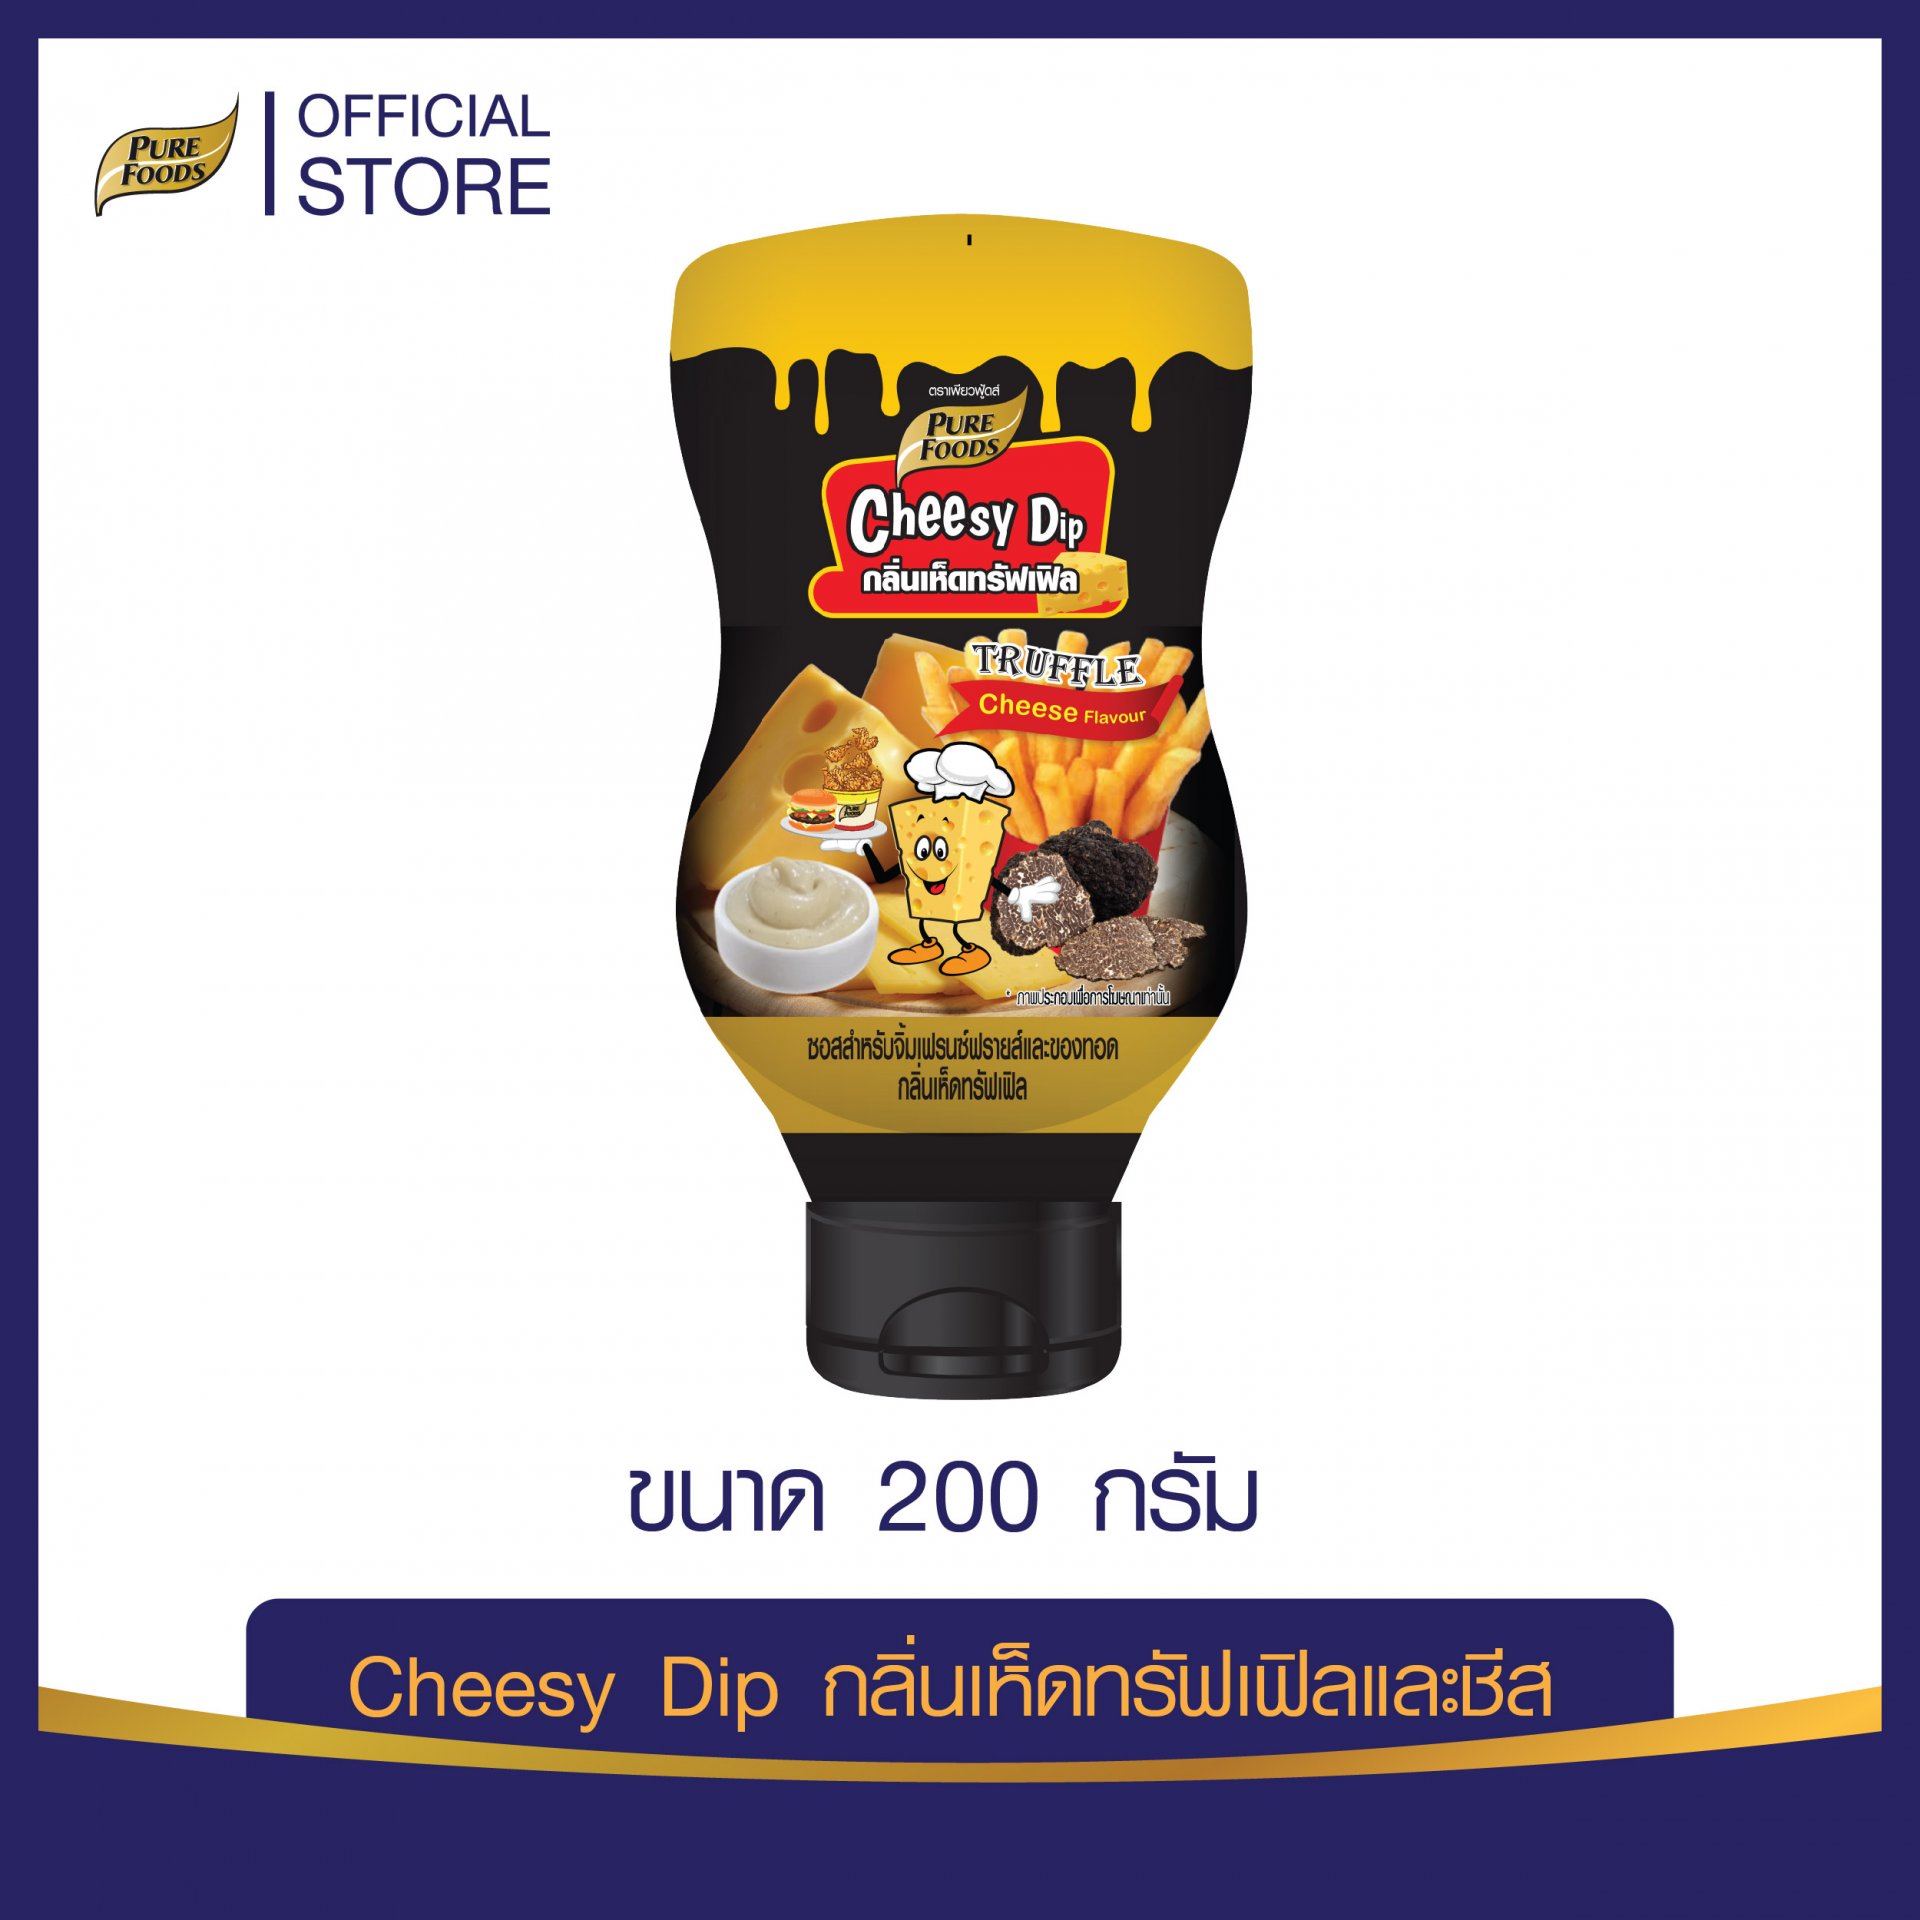 Cheese Dip Truffle and Cheese Flavor Size 200 g.